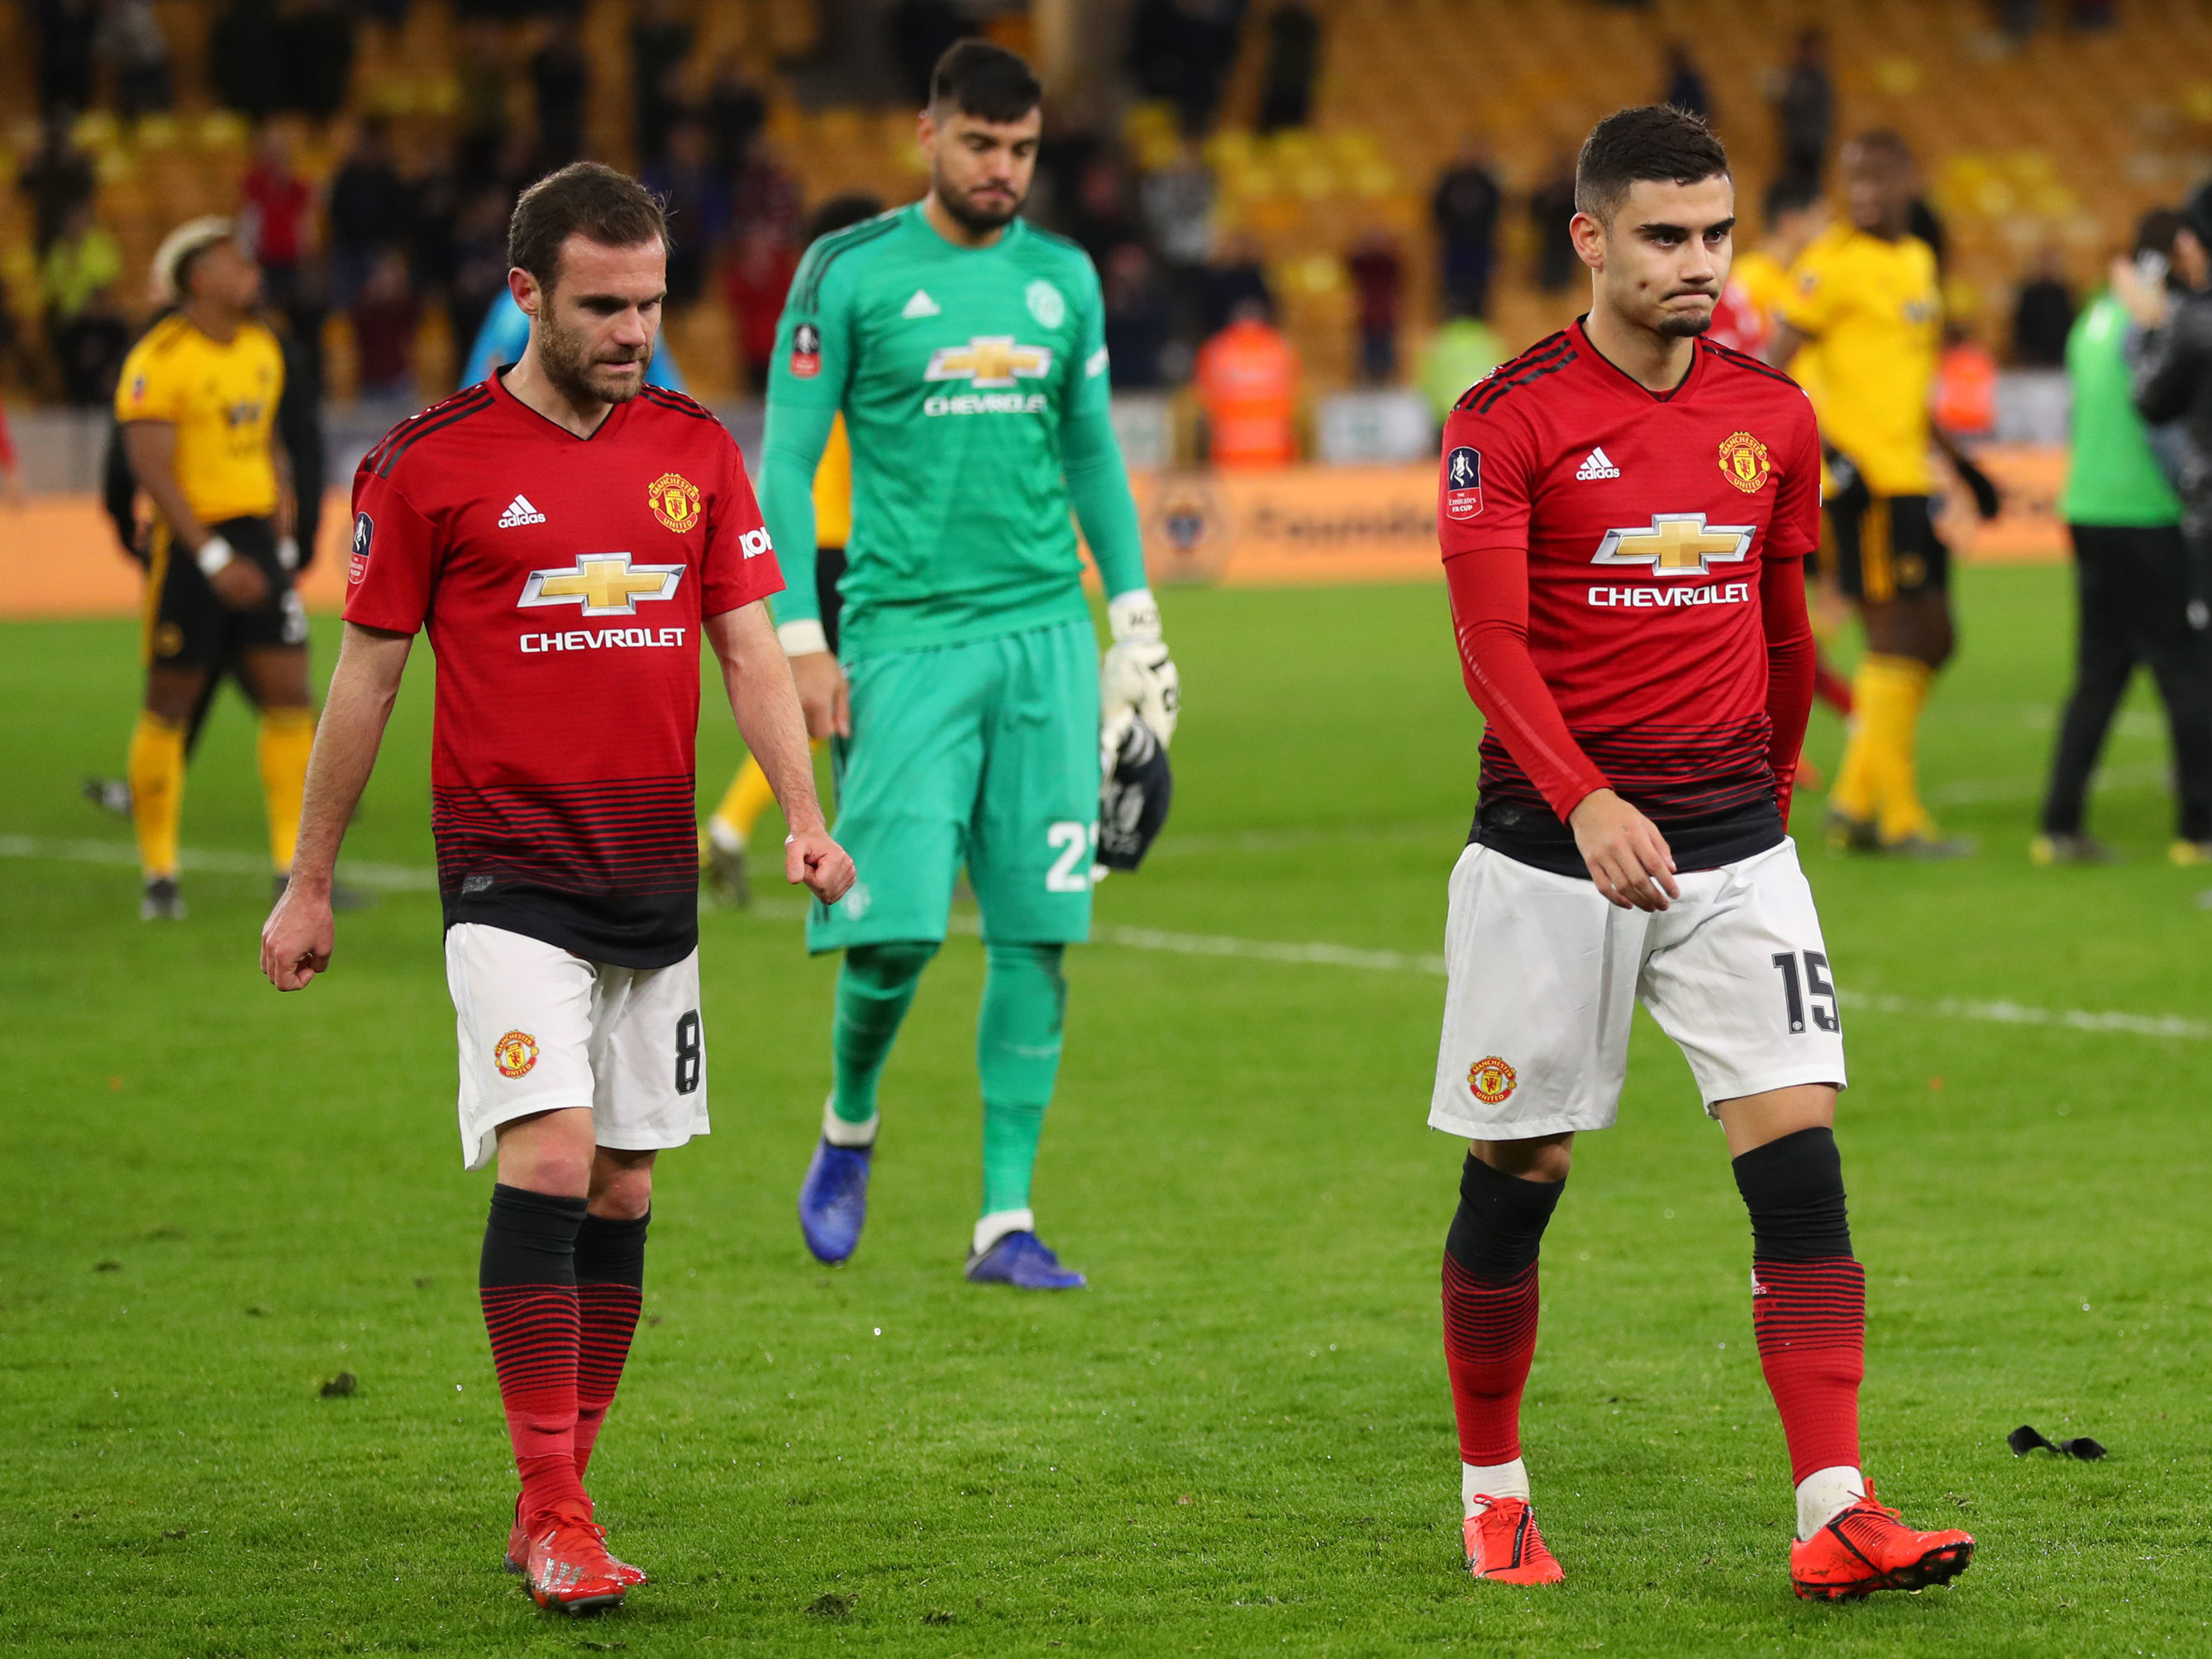 Man Utd 2019/20 Review: End of Season Report Card for the Red Devils